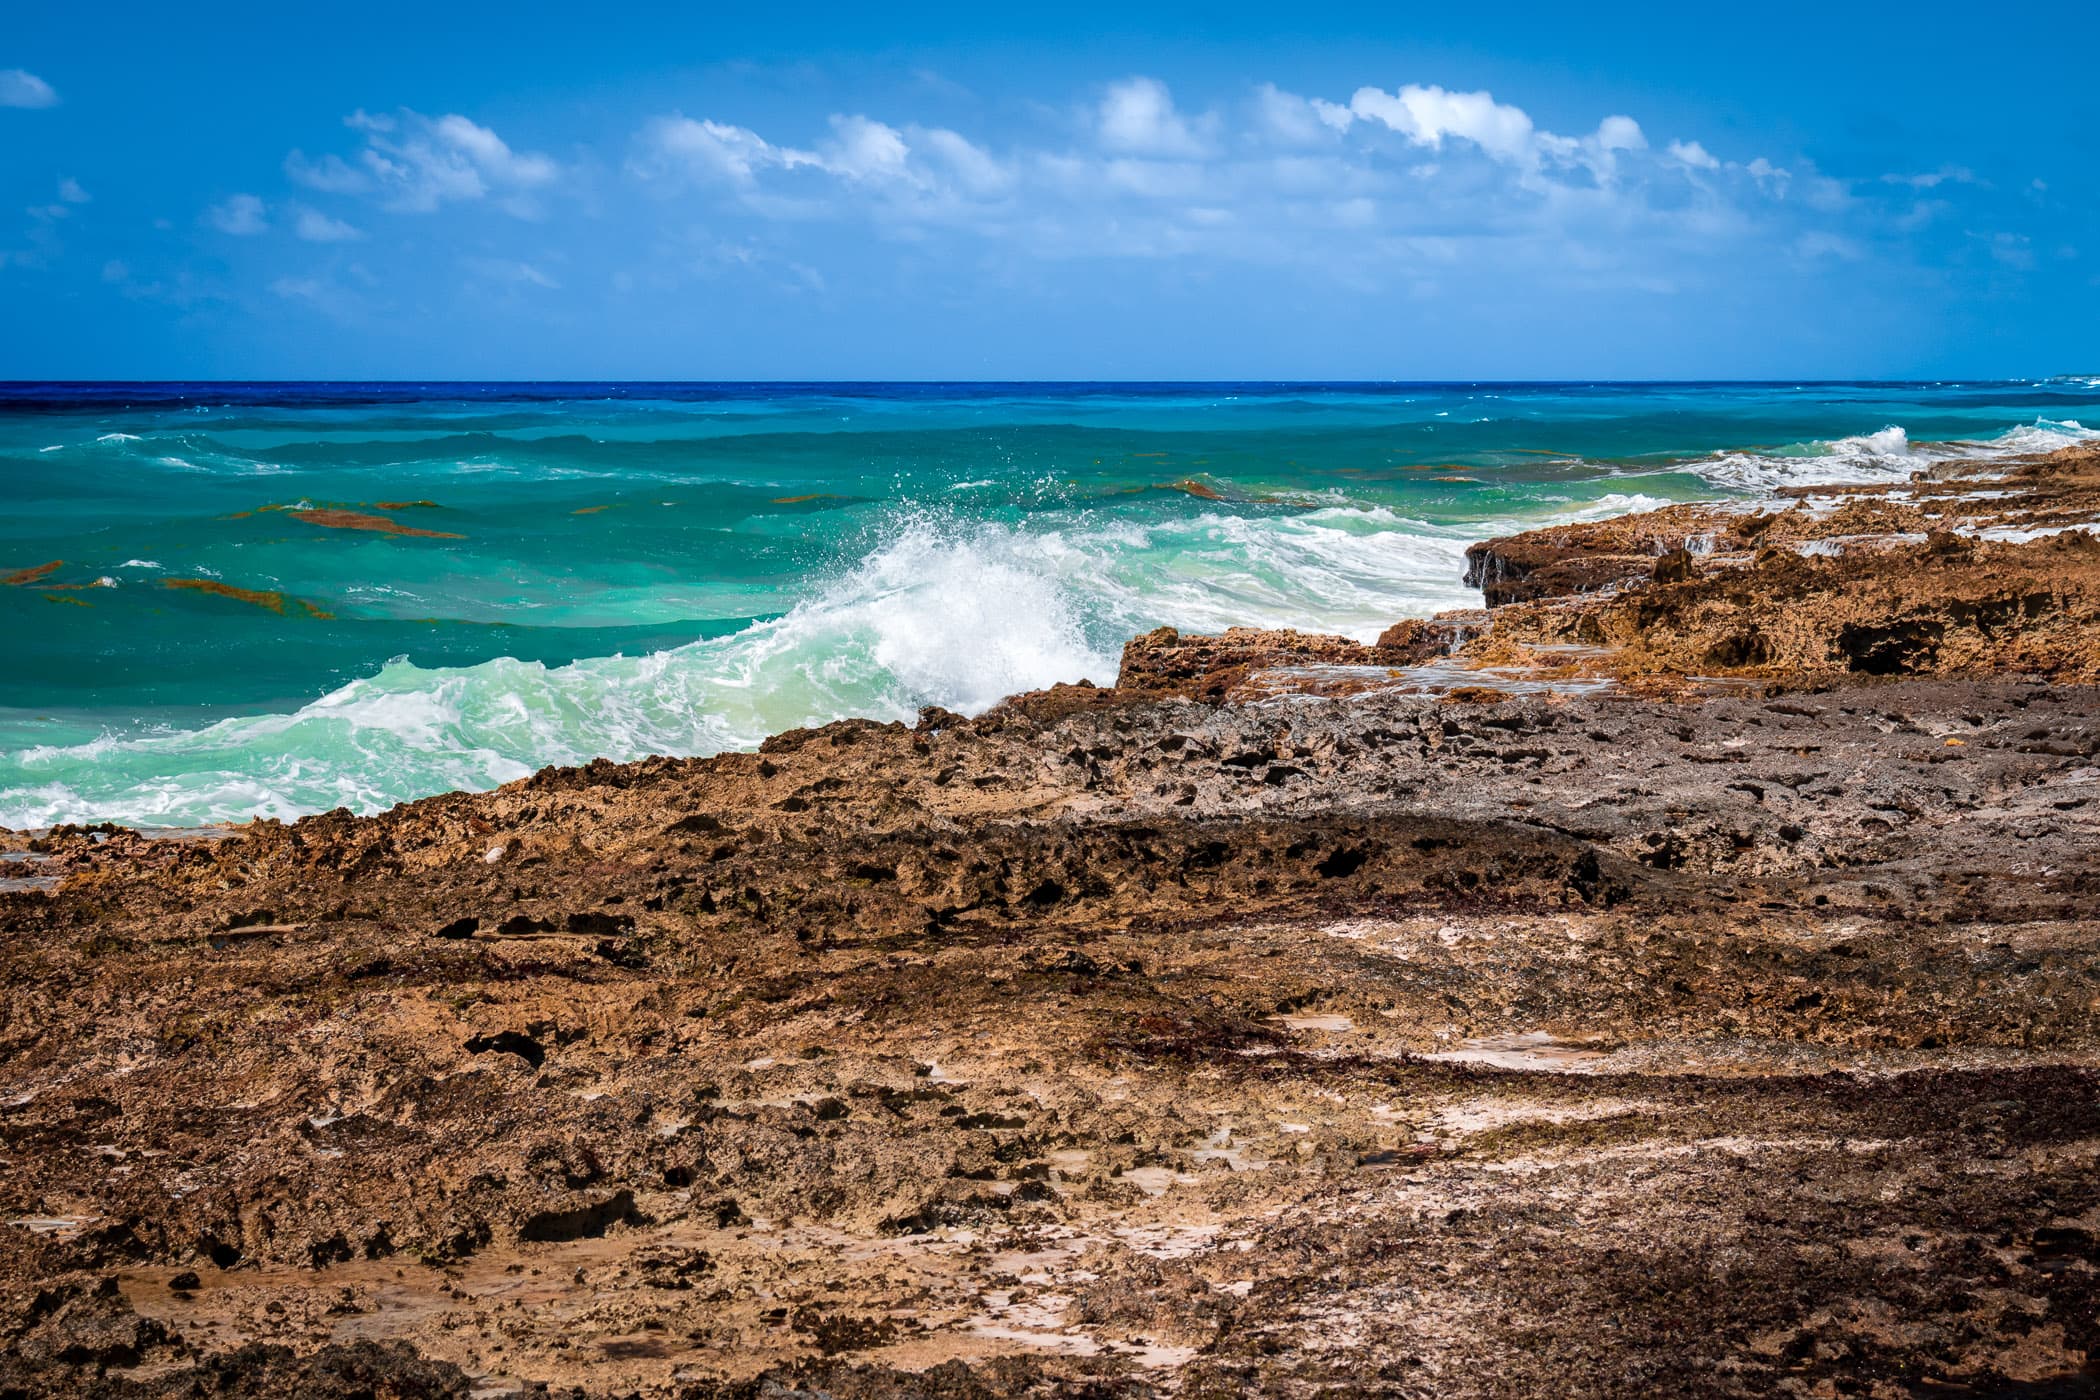 Waves crash onto the rough, rocky shore of the east side of Cozumel, Mexico.